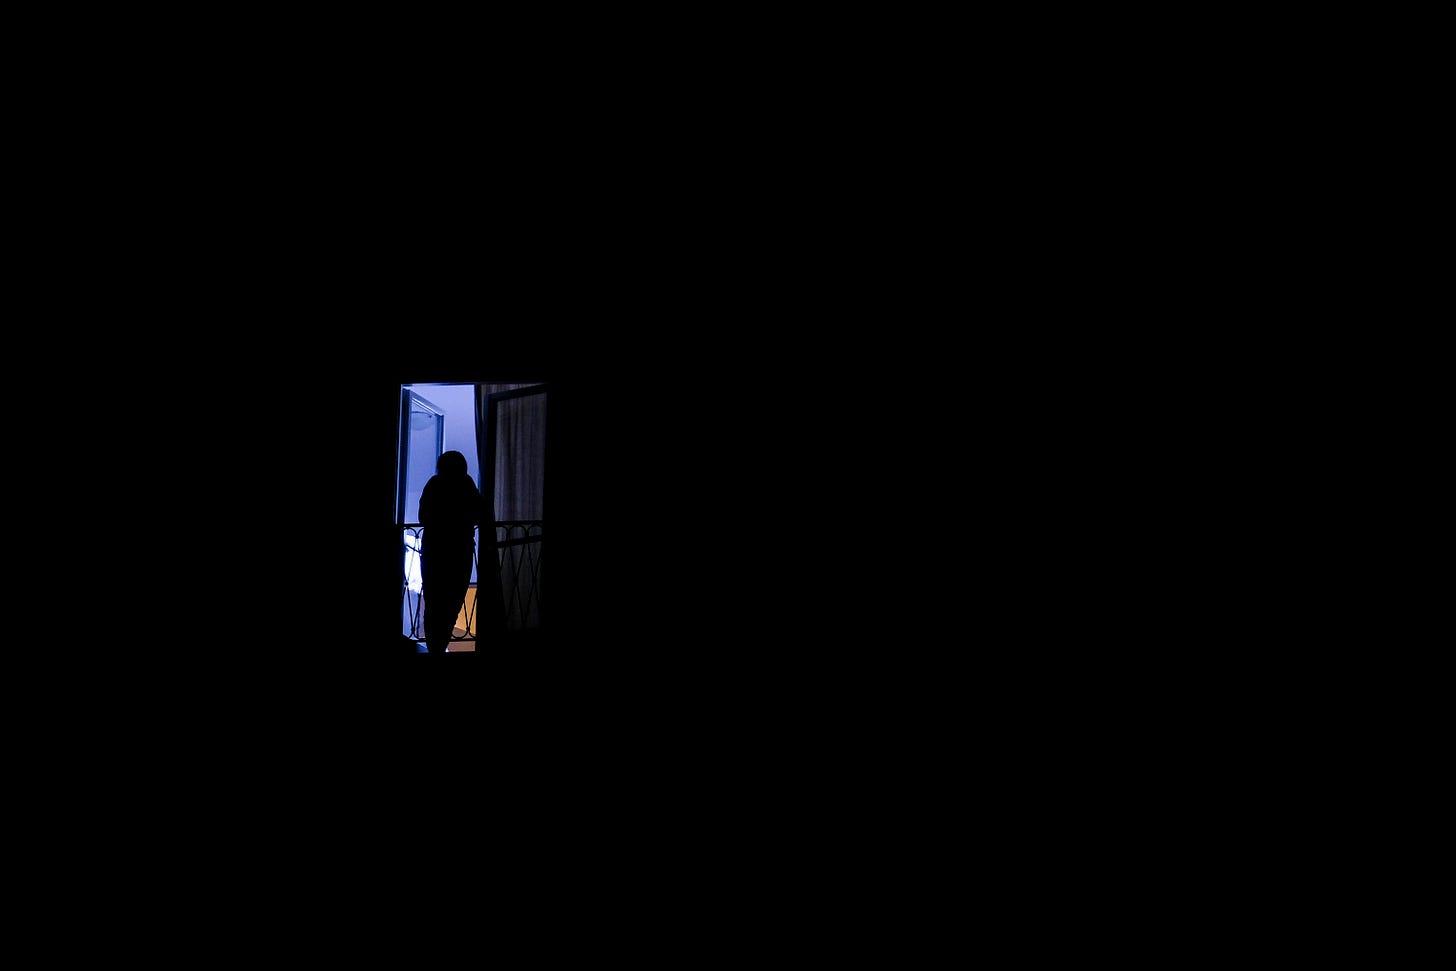 Silhoutteof a person on a small balcony in darkness